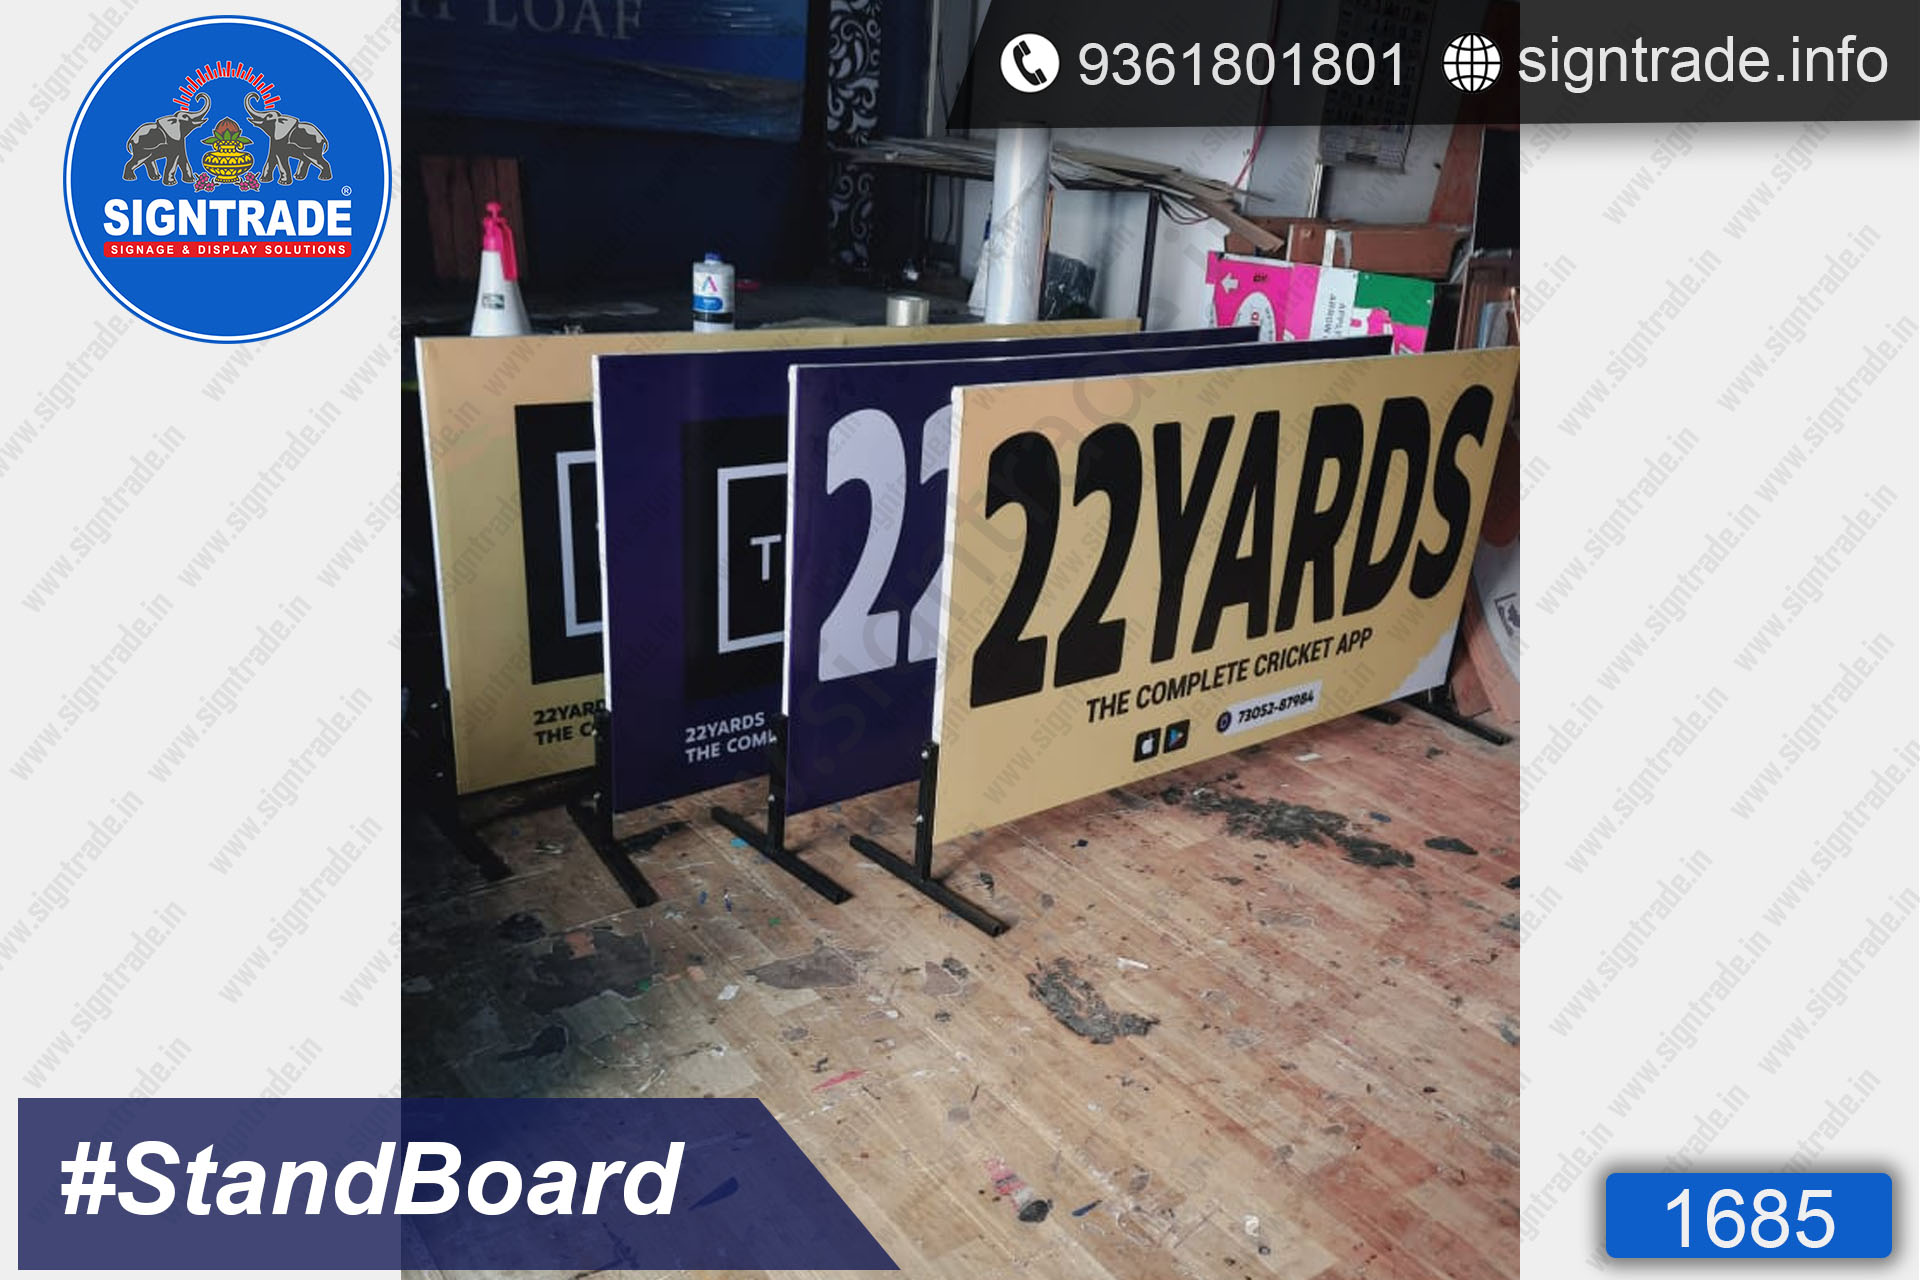 22 Yards - The Complete Cricket APP - SIGNTRADE - Custom Stand Up Flex Board - Digital Printing Services in Chennai